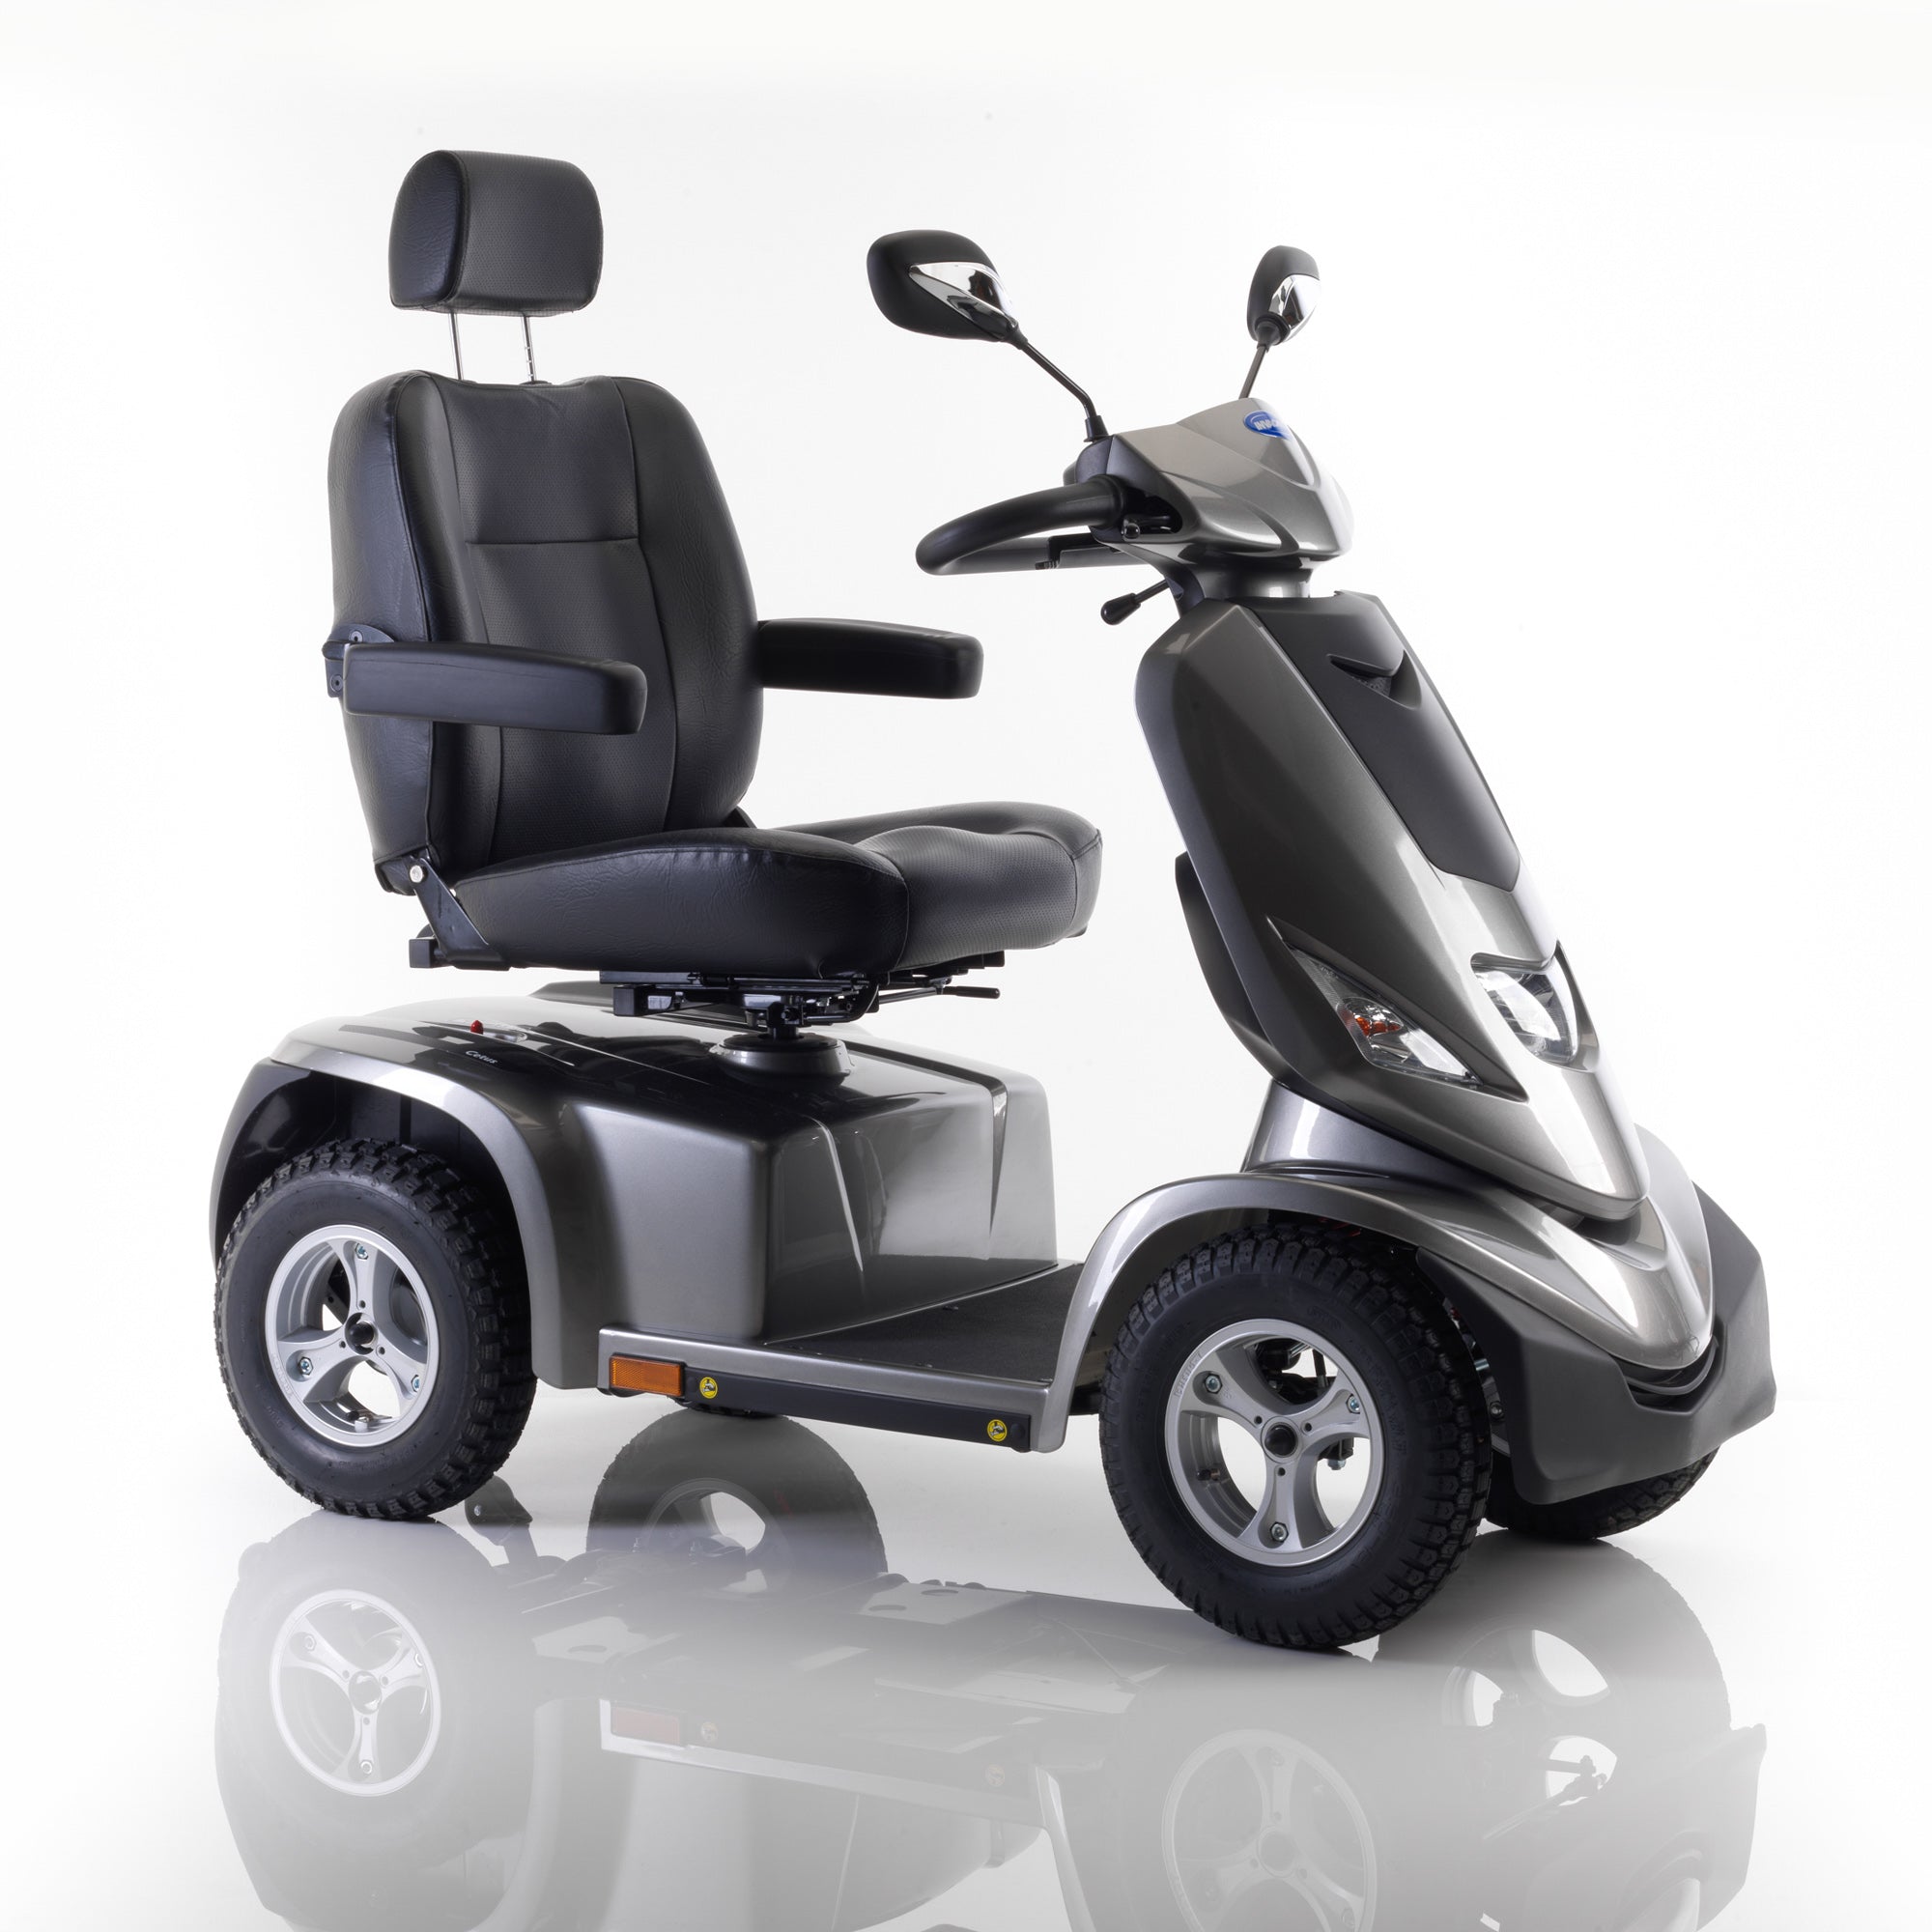 Invacare Cetus Premium High Output All Terrain Mobility Scooter Max User Weight 35st (226kg)